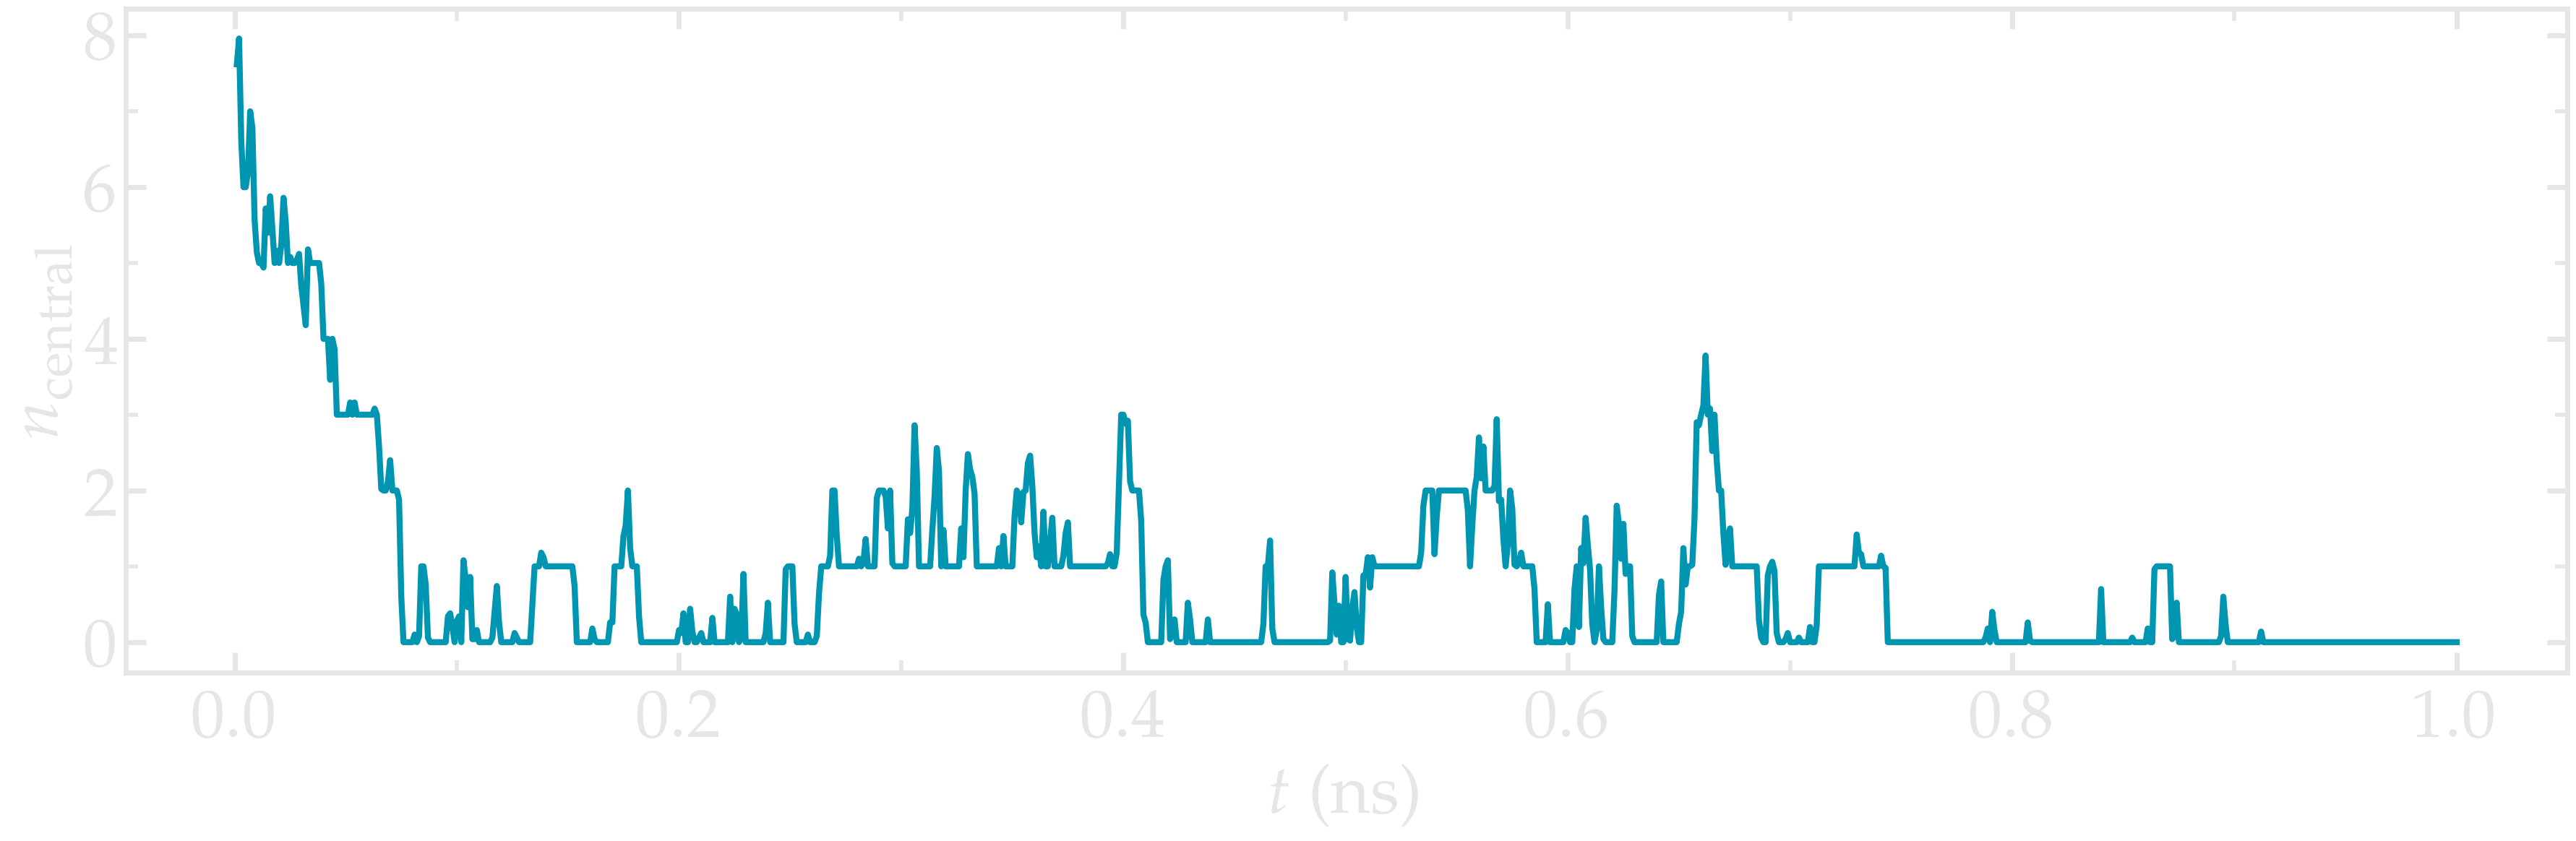 Number of particles in the central region as a function of time